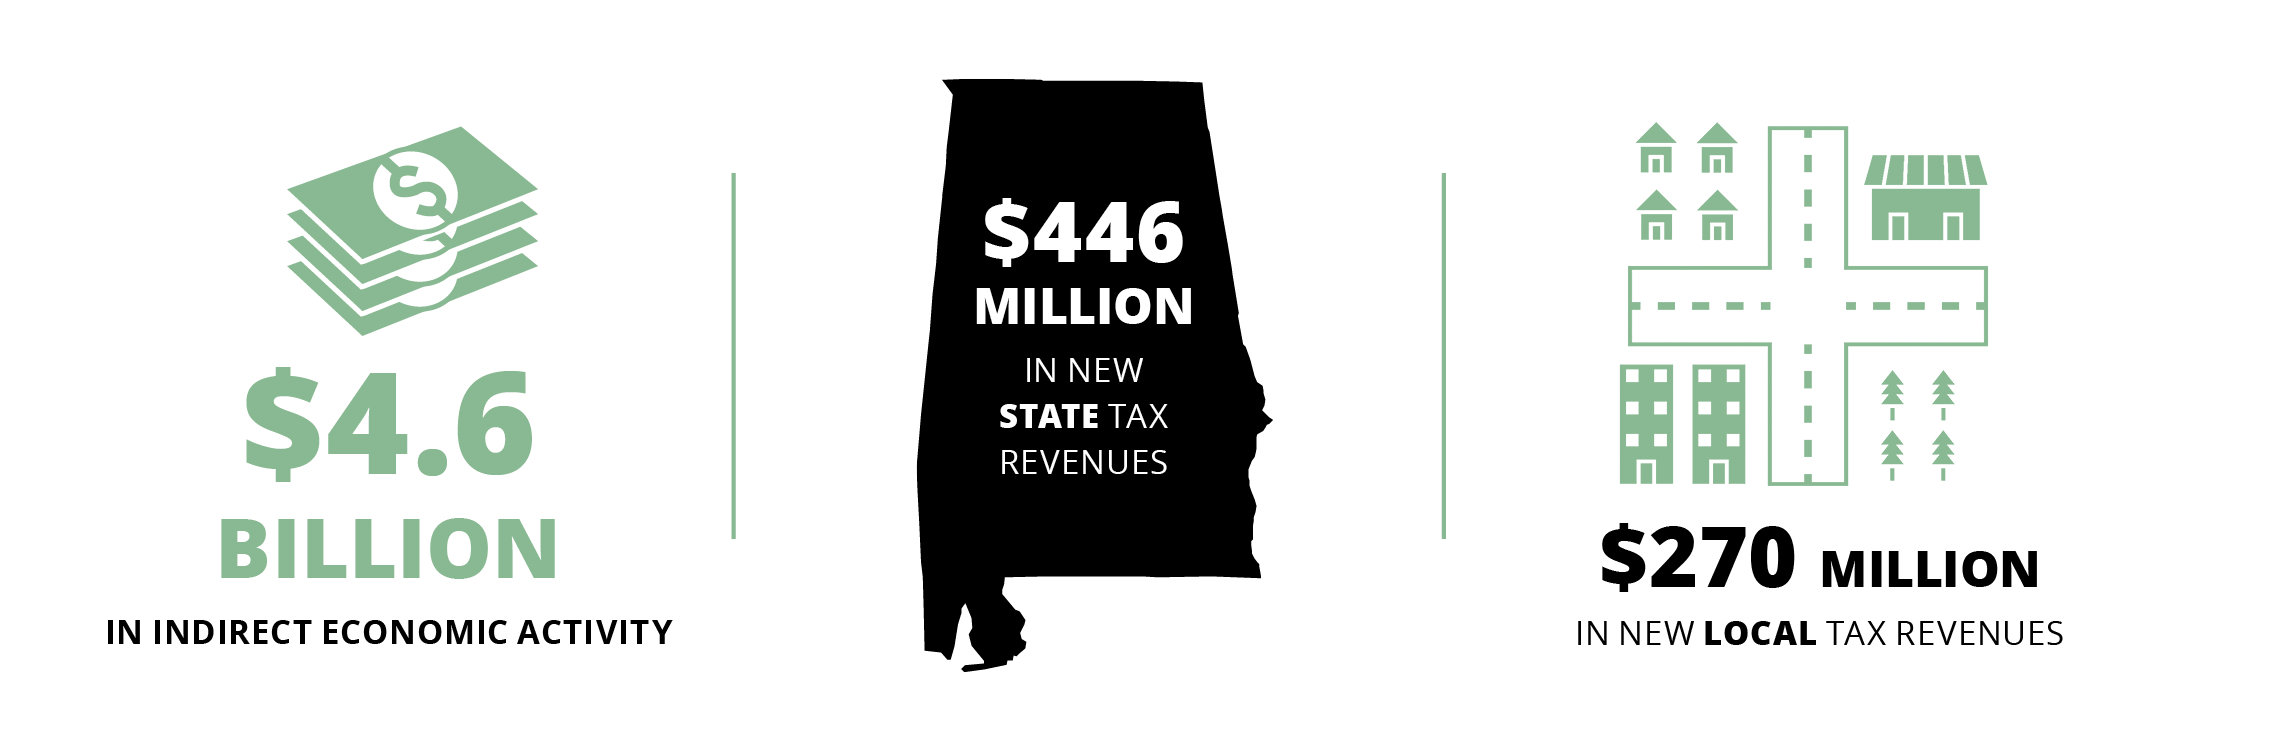 An infographic showing a direct investment of $6.7 billion for new health coverage in Alabama would yield $4.6 billion in indirect economic activity, $446 million in new state tax revenues and $270 million in new local tax revenues.